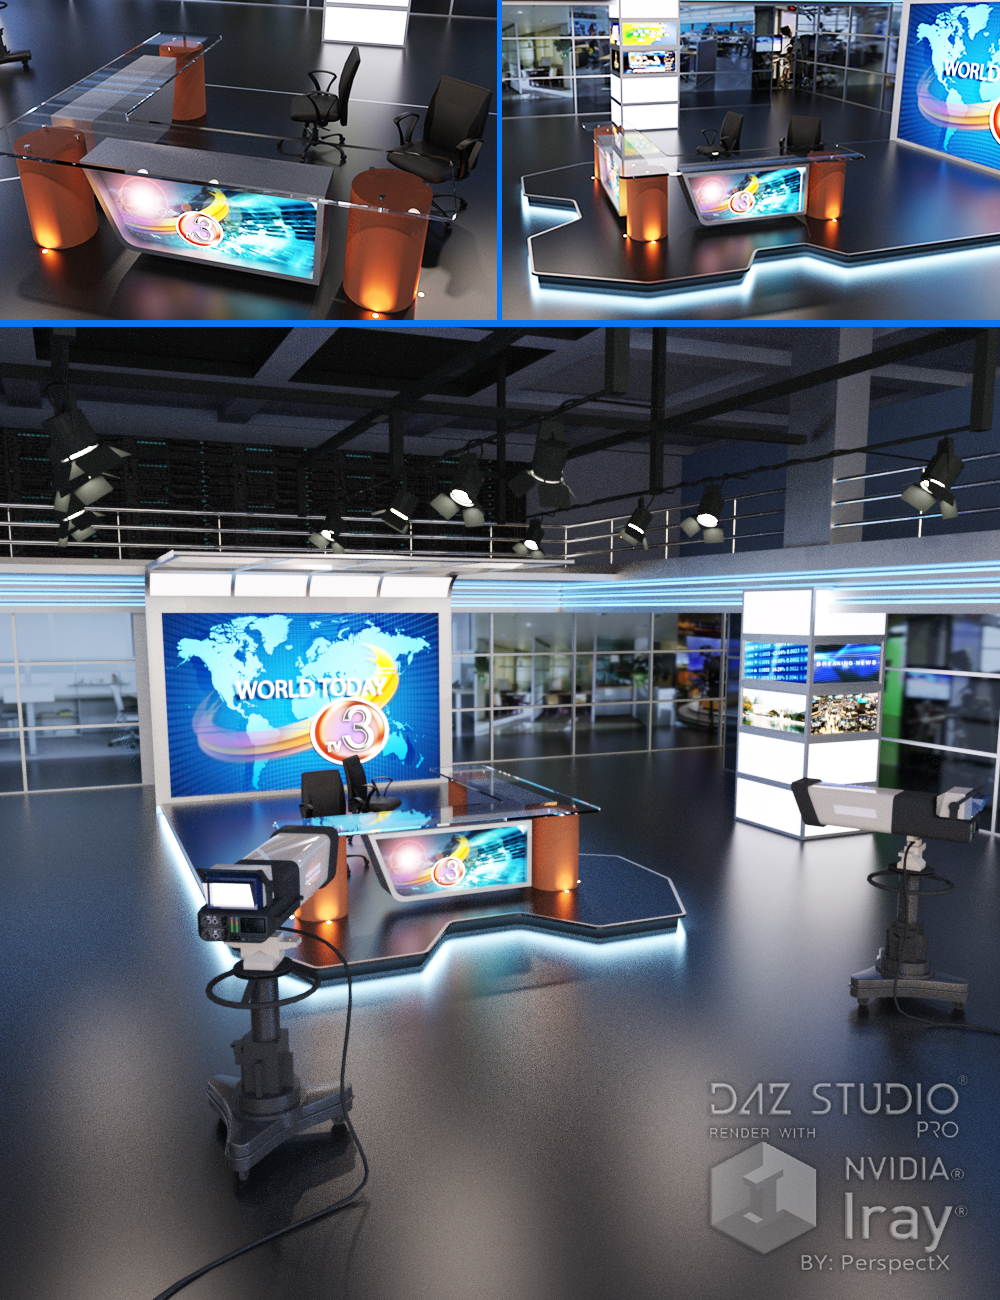 Action NewsCenter by: PerspectX, 3D Models by Daz 3D